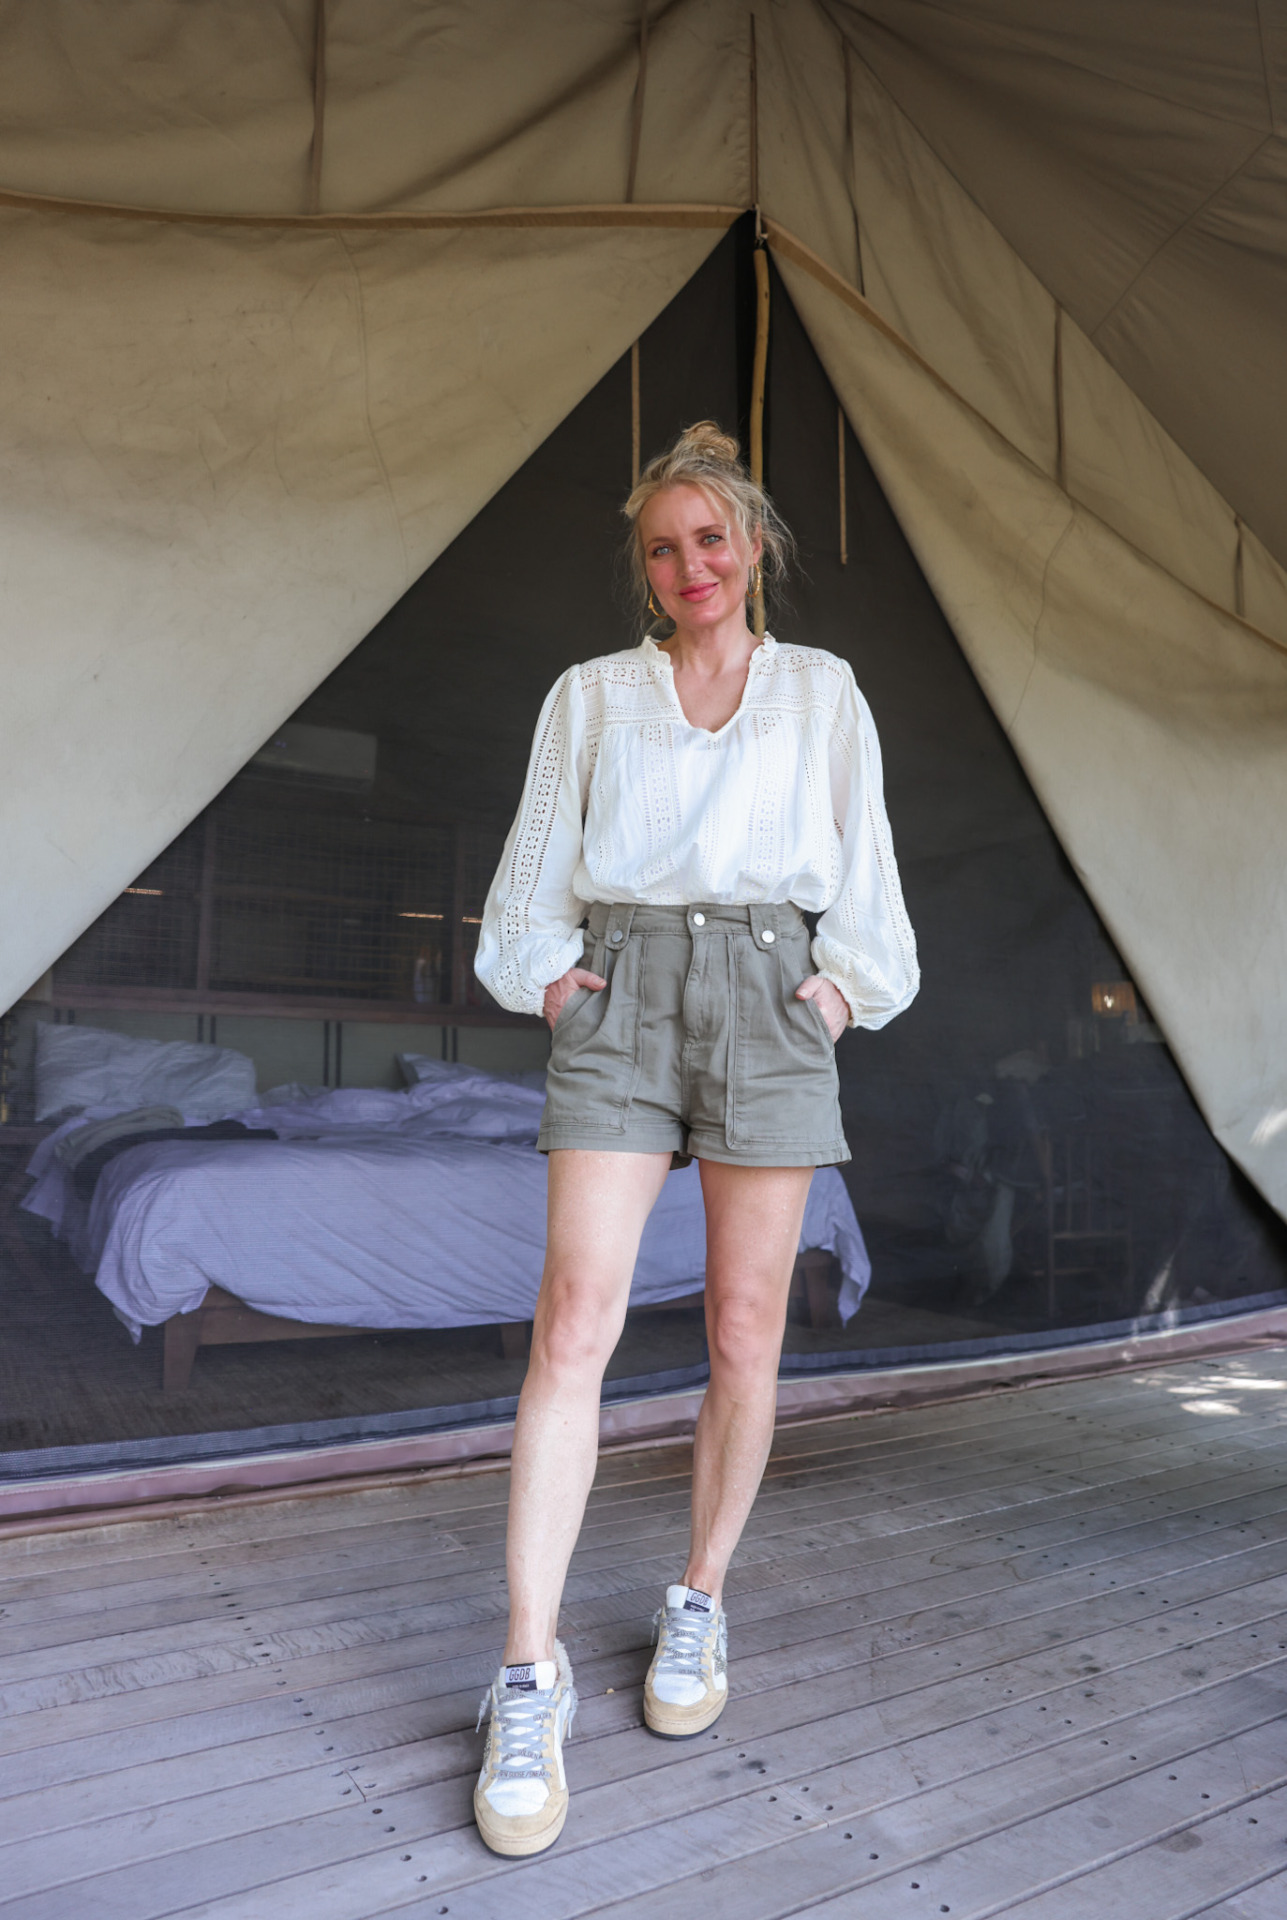 Safari Outfits Ideas That Are Easy & Affordable